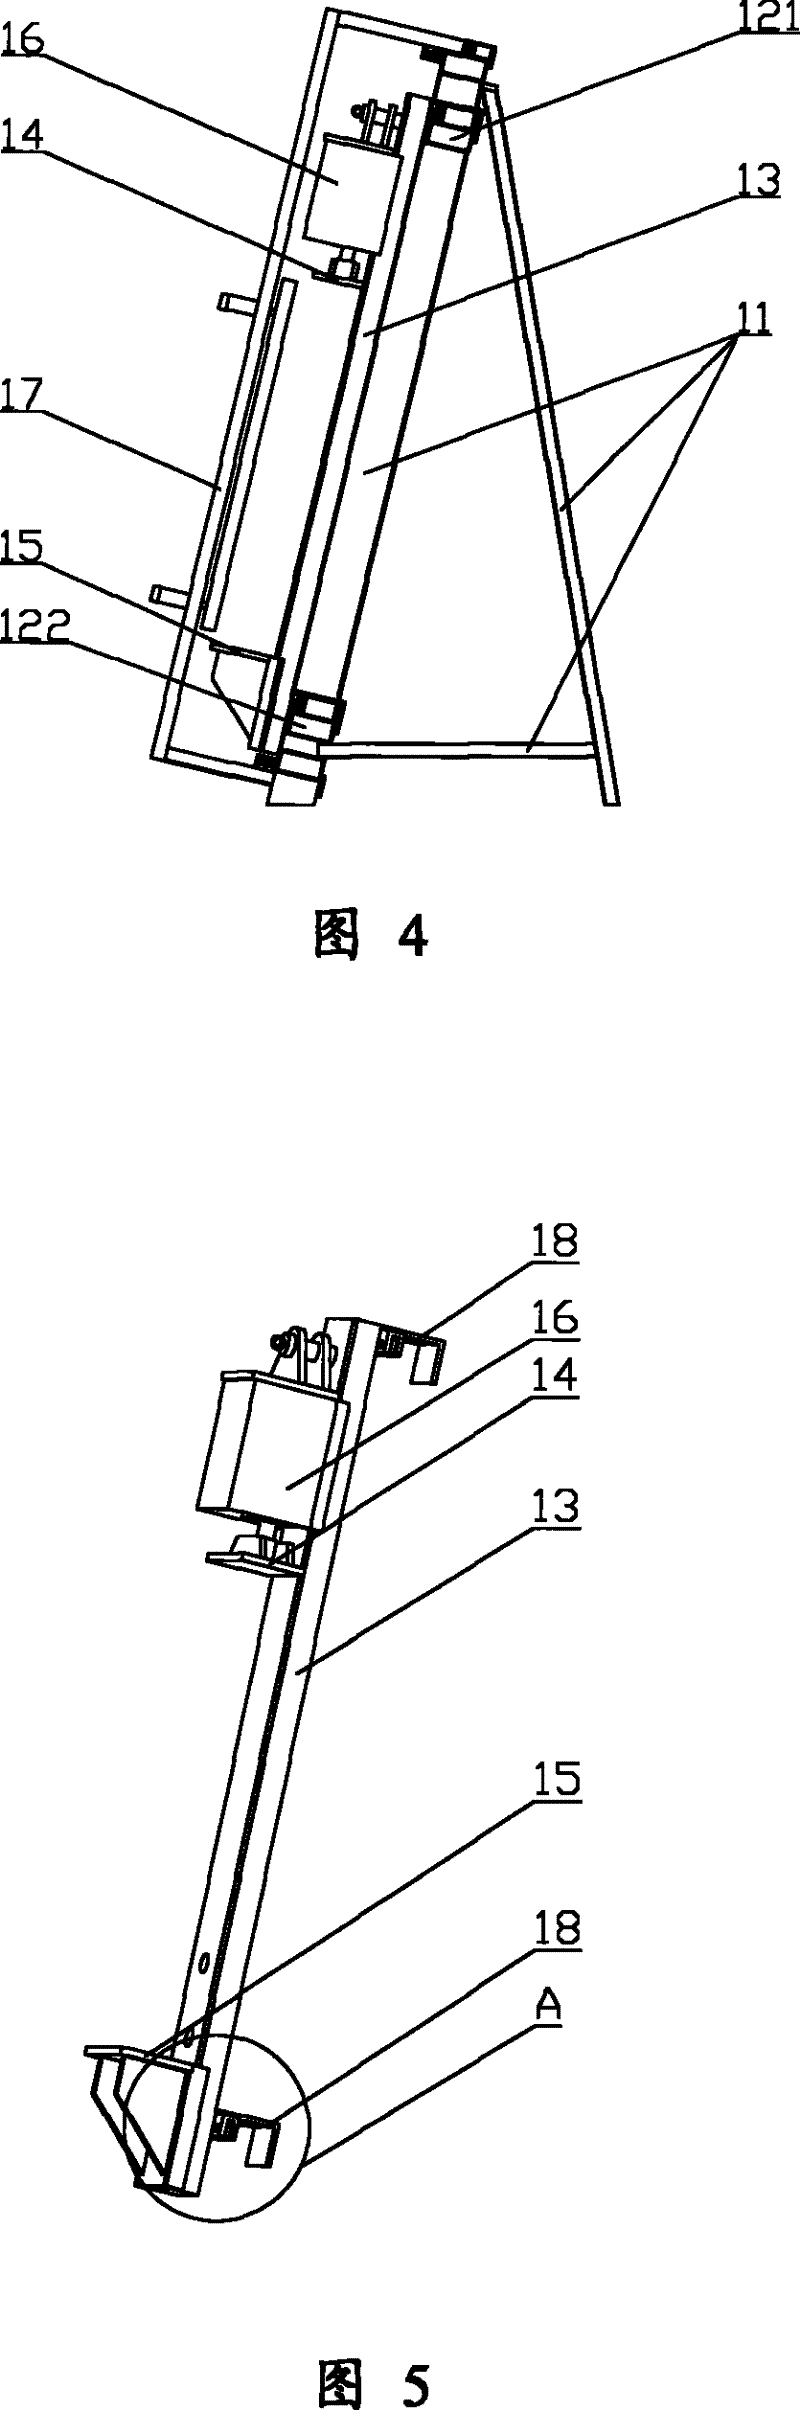 Device for assembling and pressing wood